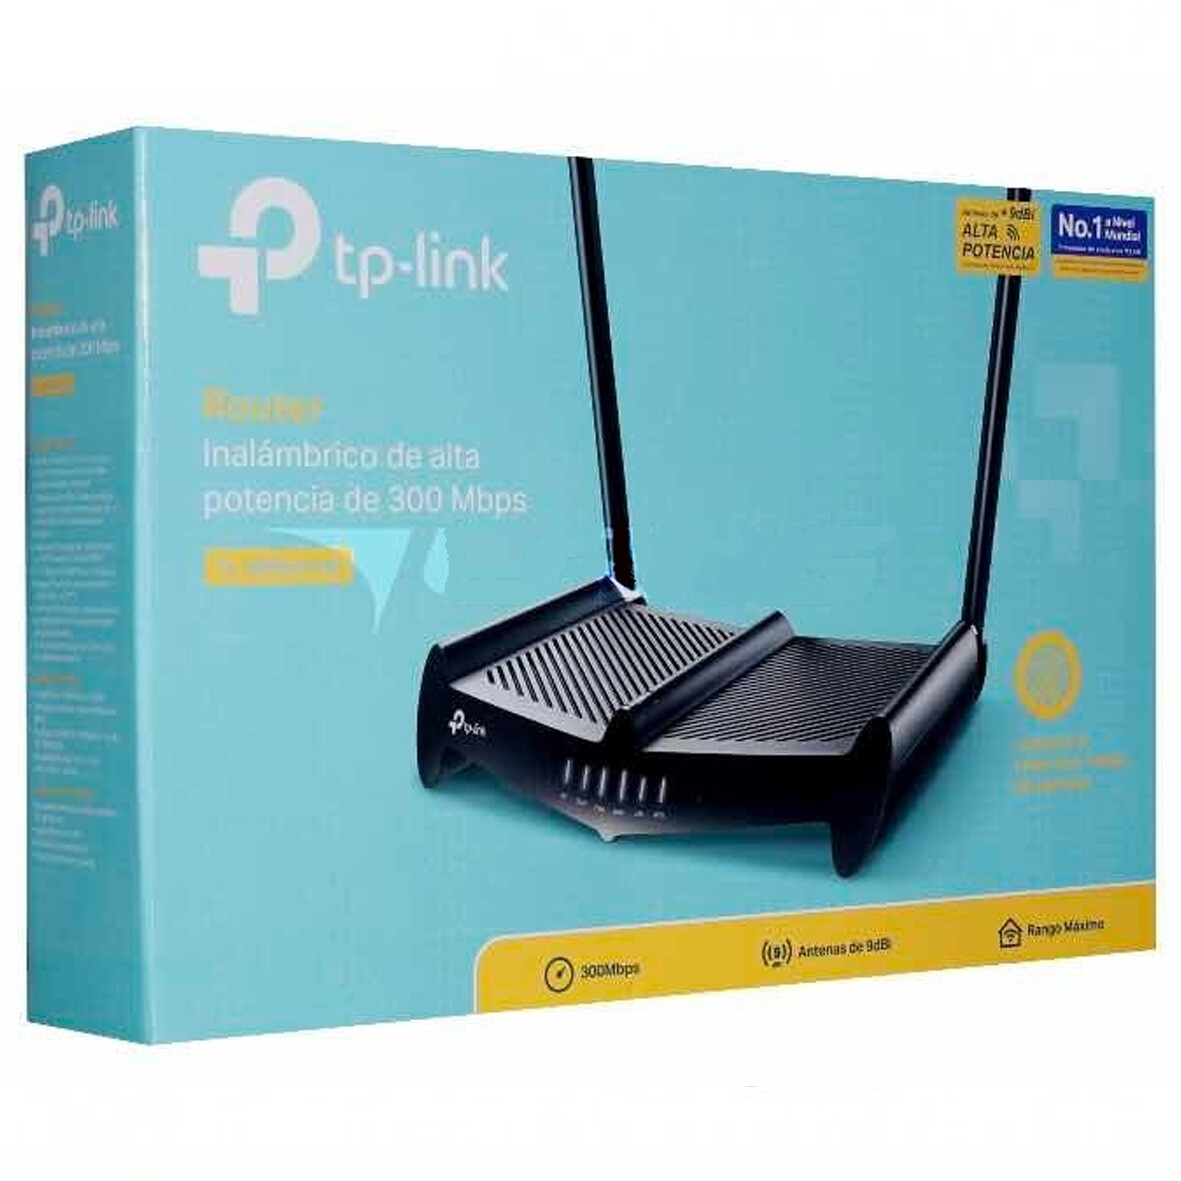 ROUTER ROMPE MUROS INTENSO TL-WR841HP 300Mbps TP LINK